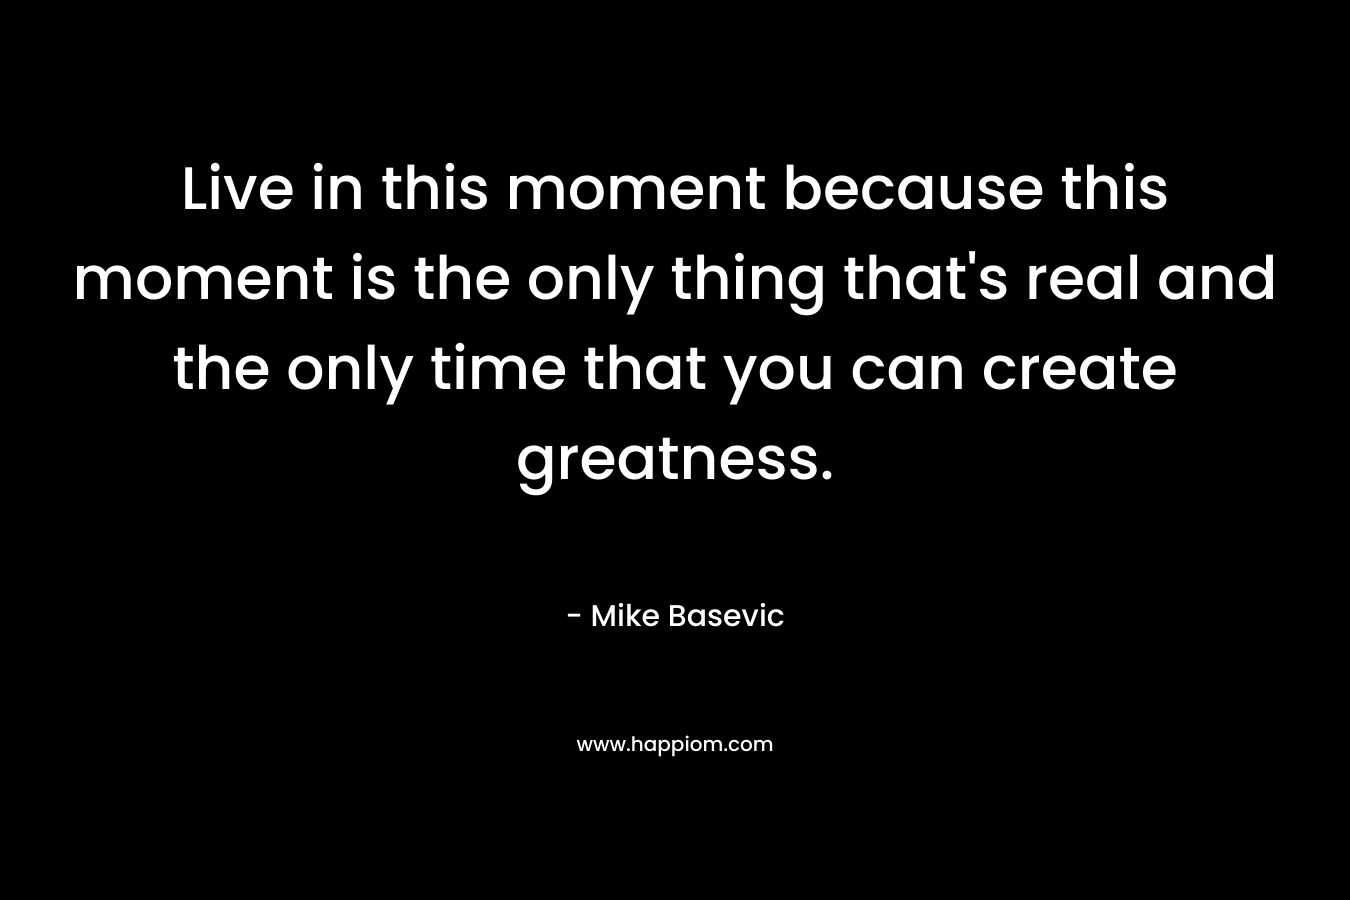 Live in this moment because this moment is the only thing that's real and the only time that you can create greatness.